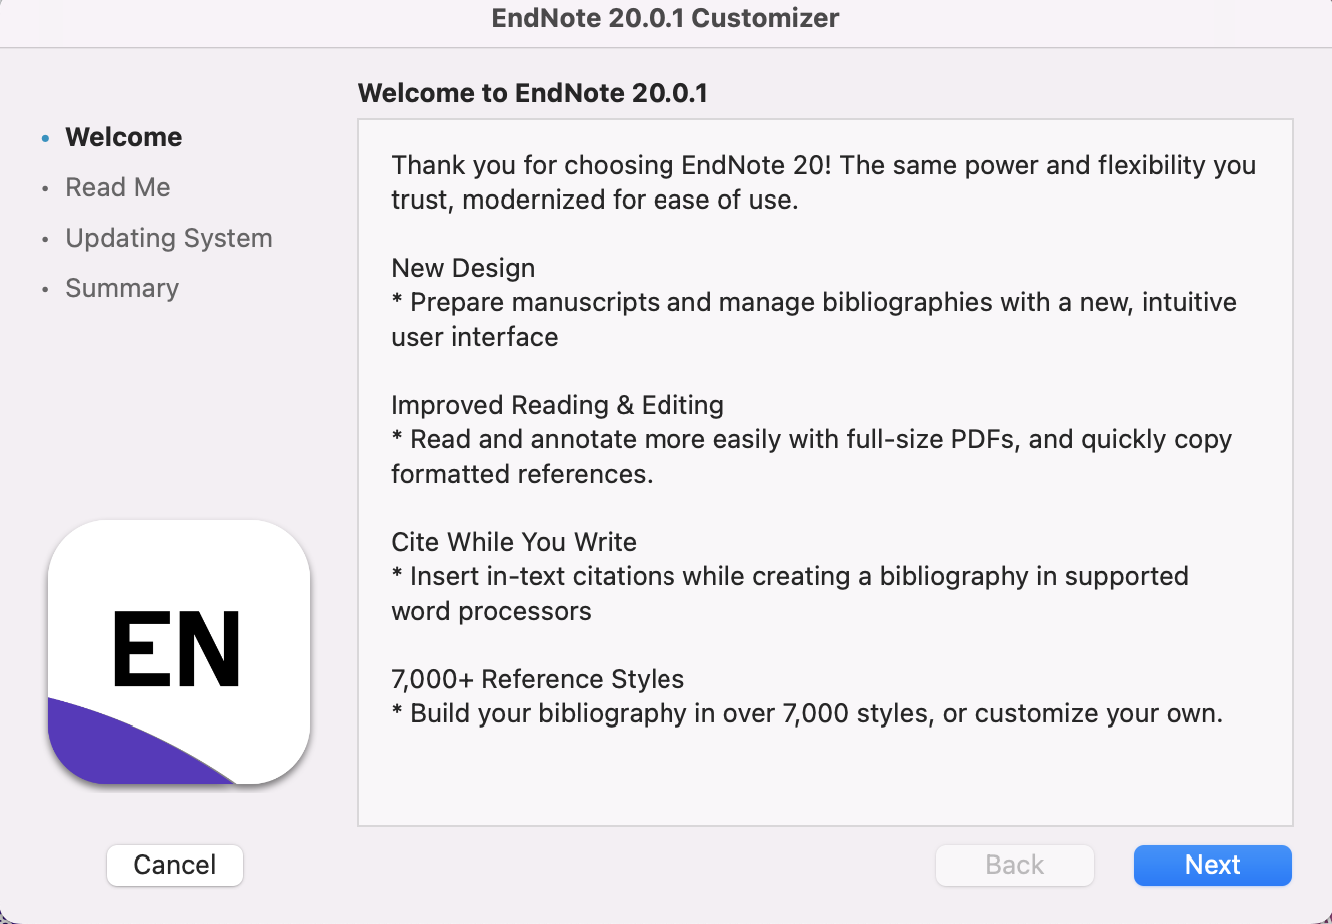 A text box. To the left is a menu that reads "Welcome, Read Me, Updating System, Summary". "Welcome" is in bold font. Next to the menu is a text box that reads: "Welcome to EndNote 20.0.1. Thank you for choosing EndNote 20! The same power and flexibility you trust, modernized for ease of use. New Design: prepare manuscripts and manage bibliographies with a new, intuitive user interface. Improved Reading and Editing: Read and annotate more easily with full-size PDFs, and quickly copy formatted references. Cite While You Write: Insert in-text citations while creating a bibliography in supported word processors. 7,000+ Reference Styles: Build your bibliography in over 7,000 styles, or customize your own." A "Next" button is at the bottom of the box.